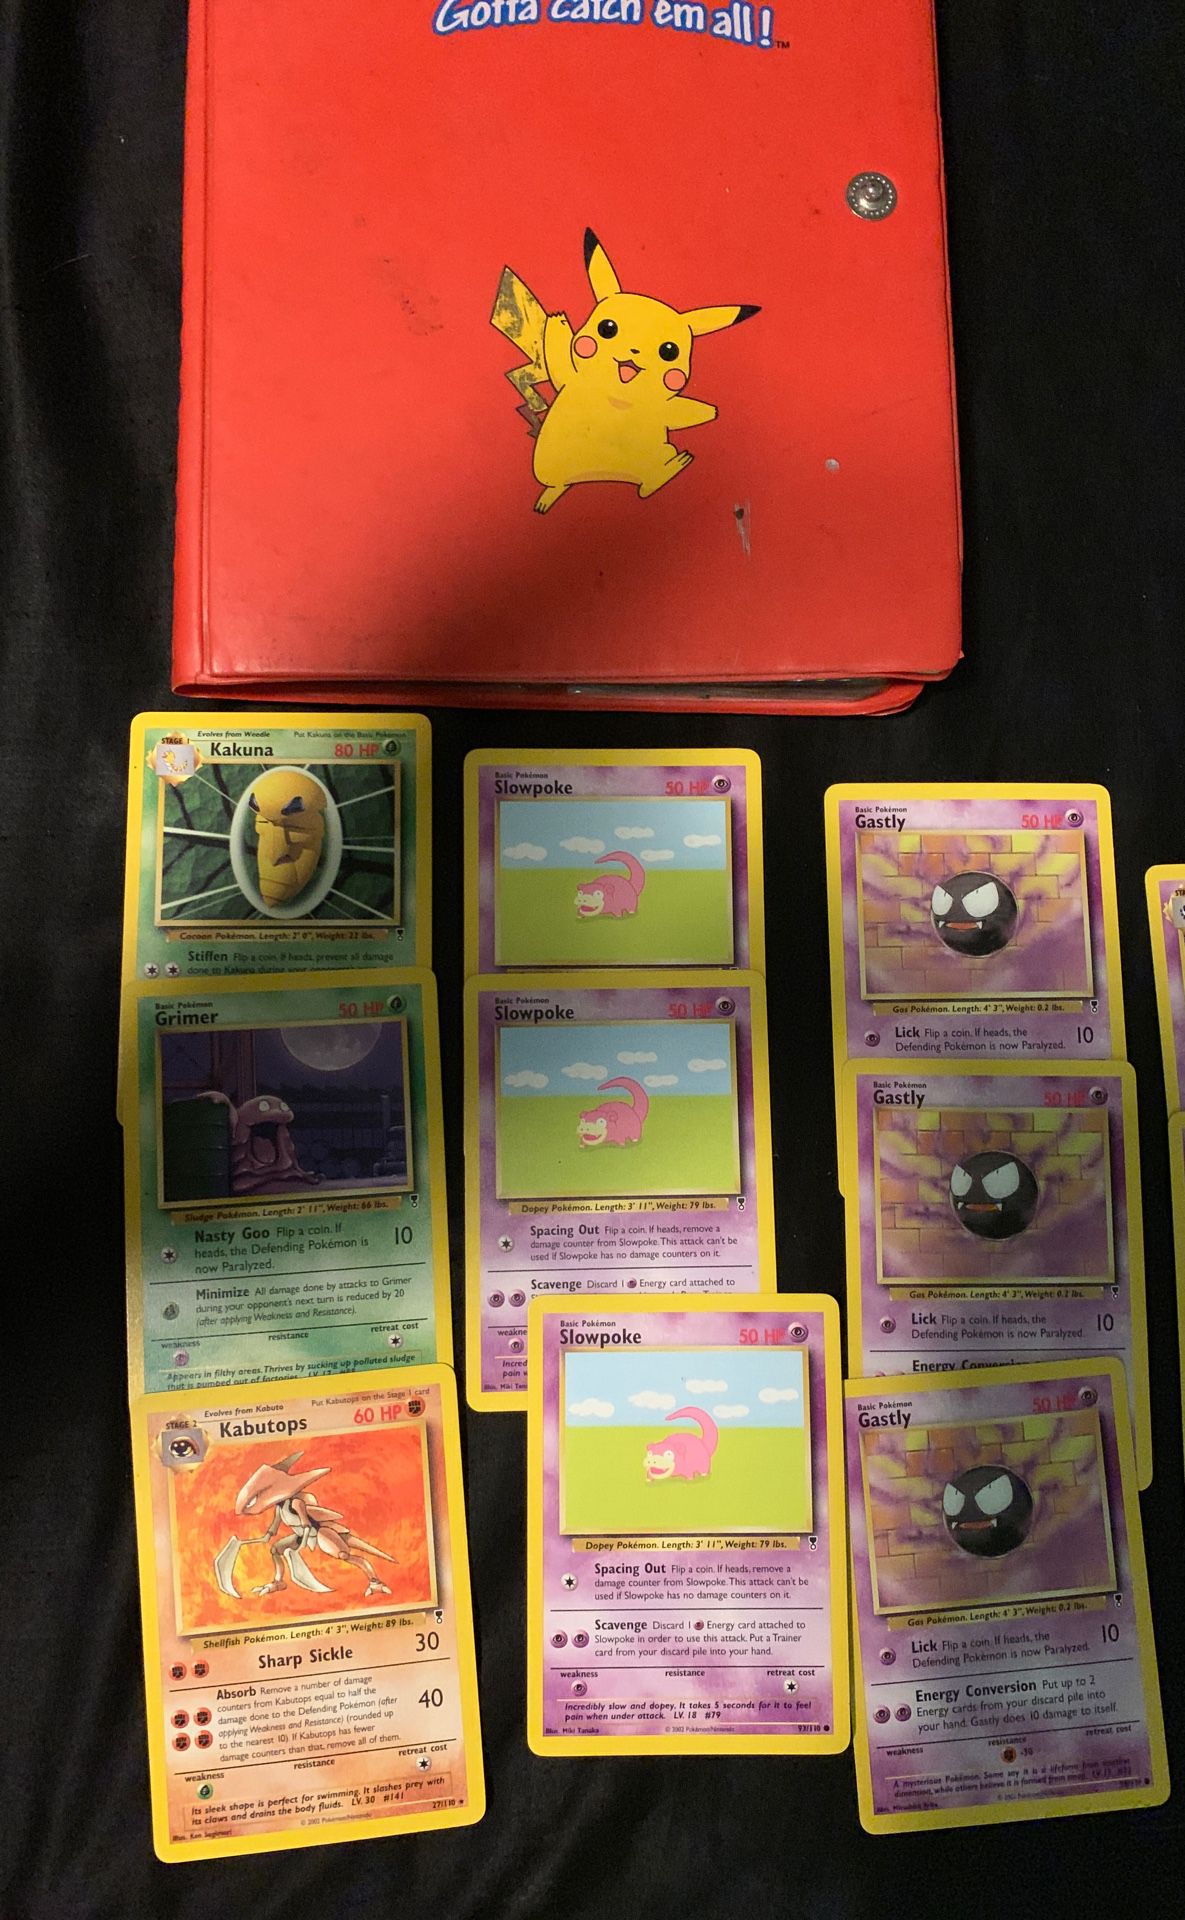 16 Pokémon cards from legendary collection!! Insanely rare set 2002!!